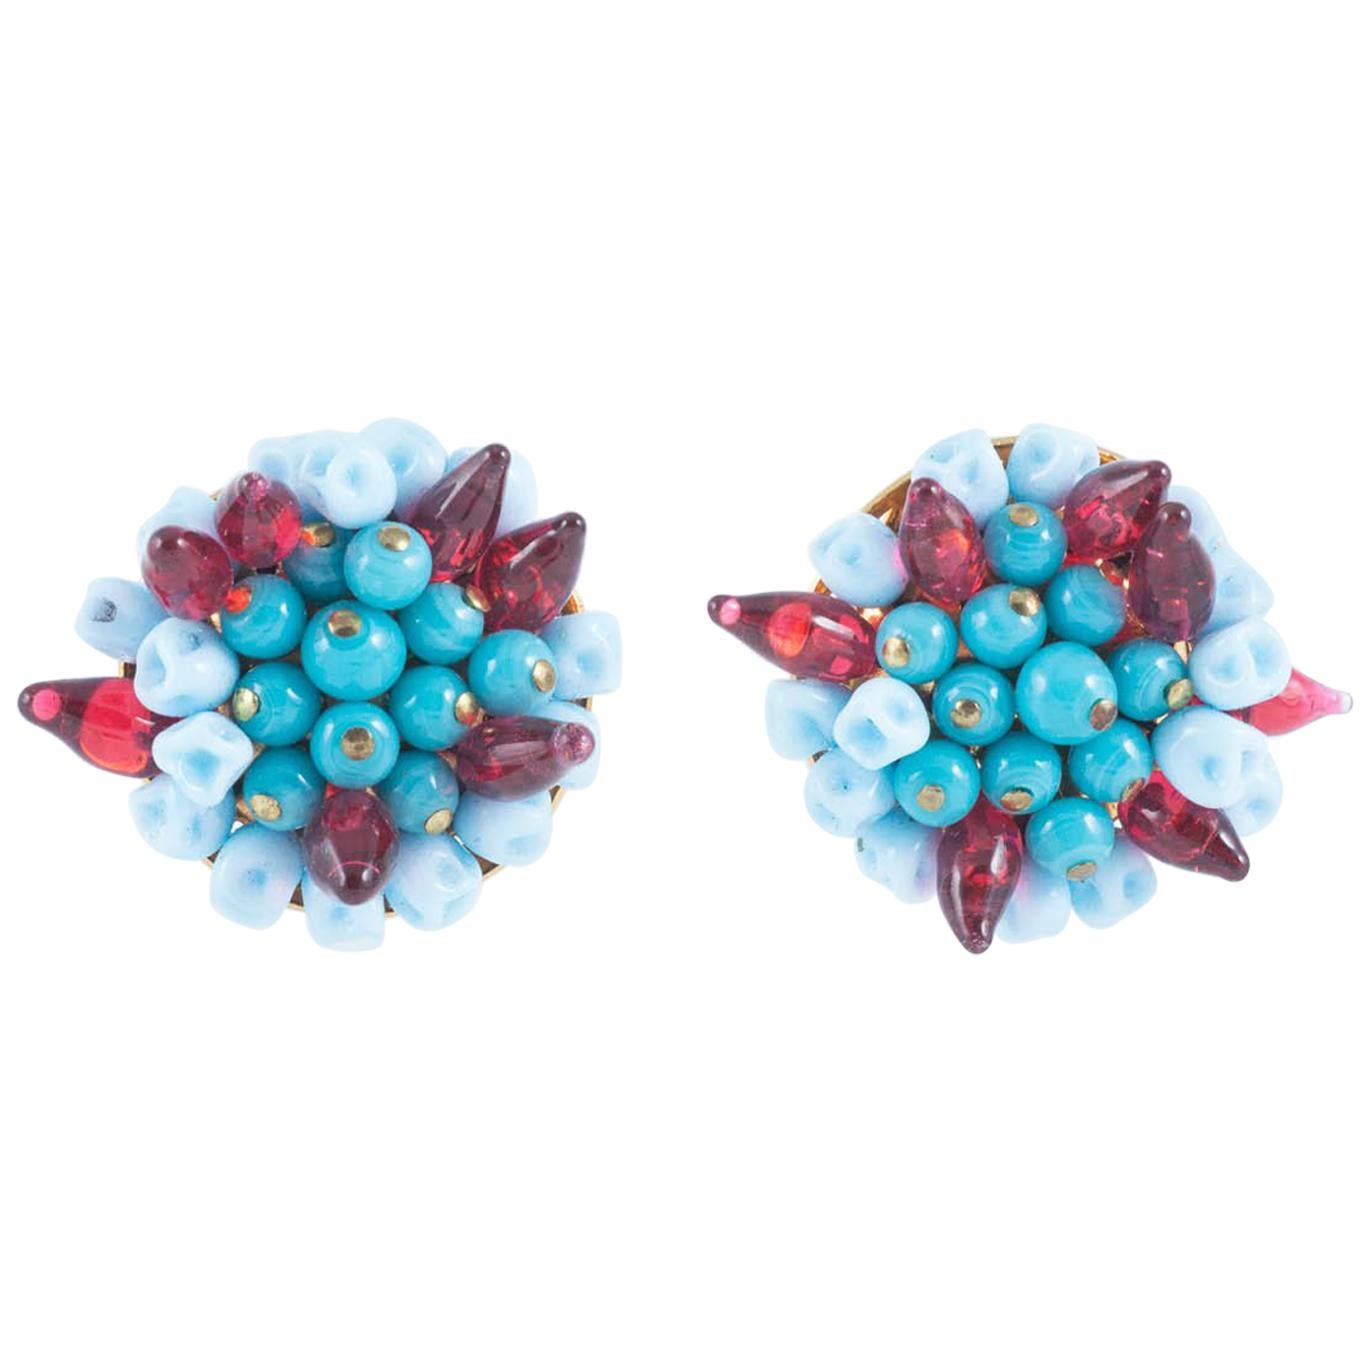 Turquoise and ruby poured glass 'cluster earrings, Histoire de Verre, 2005